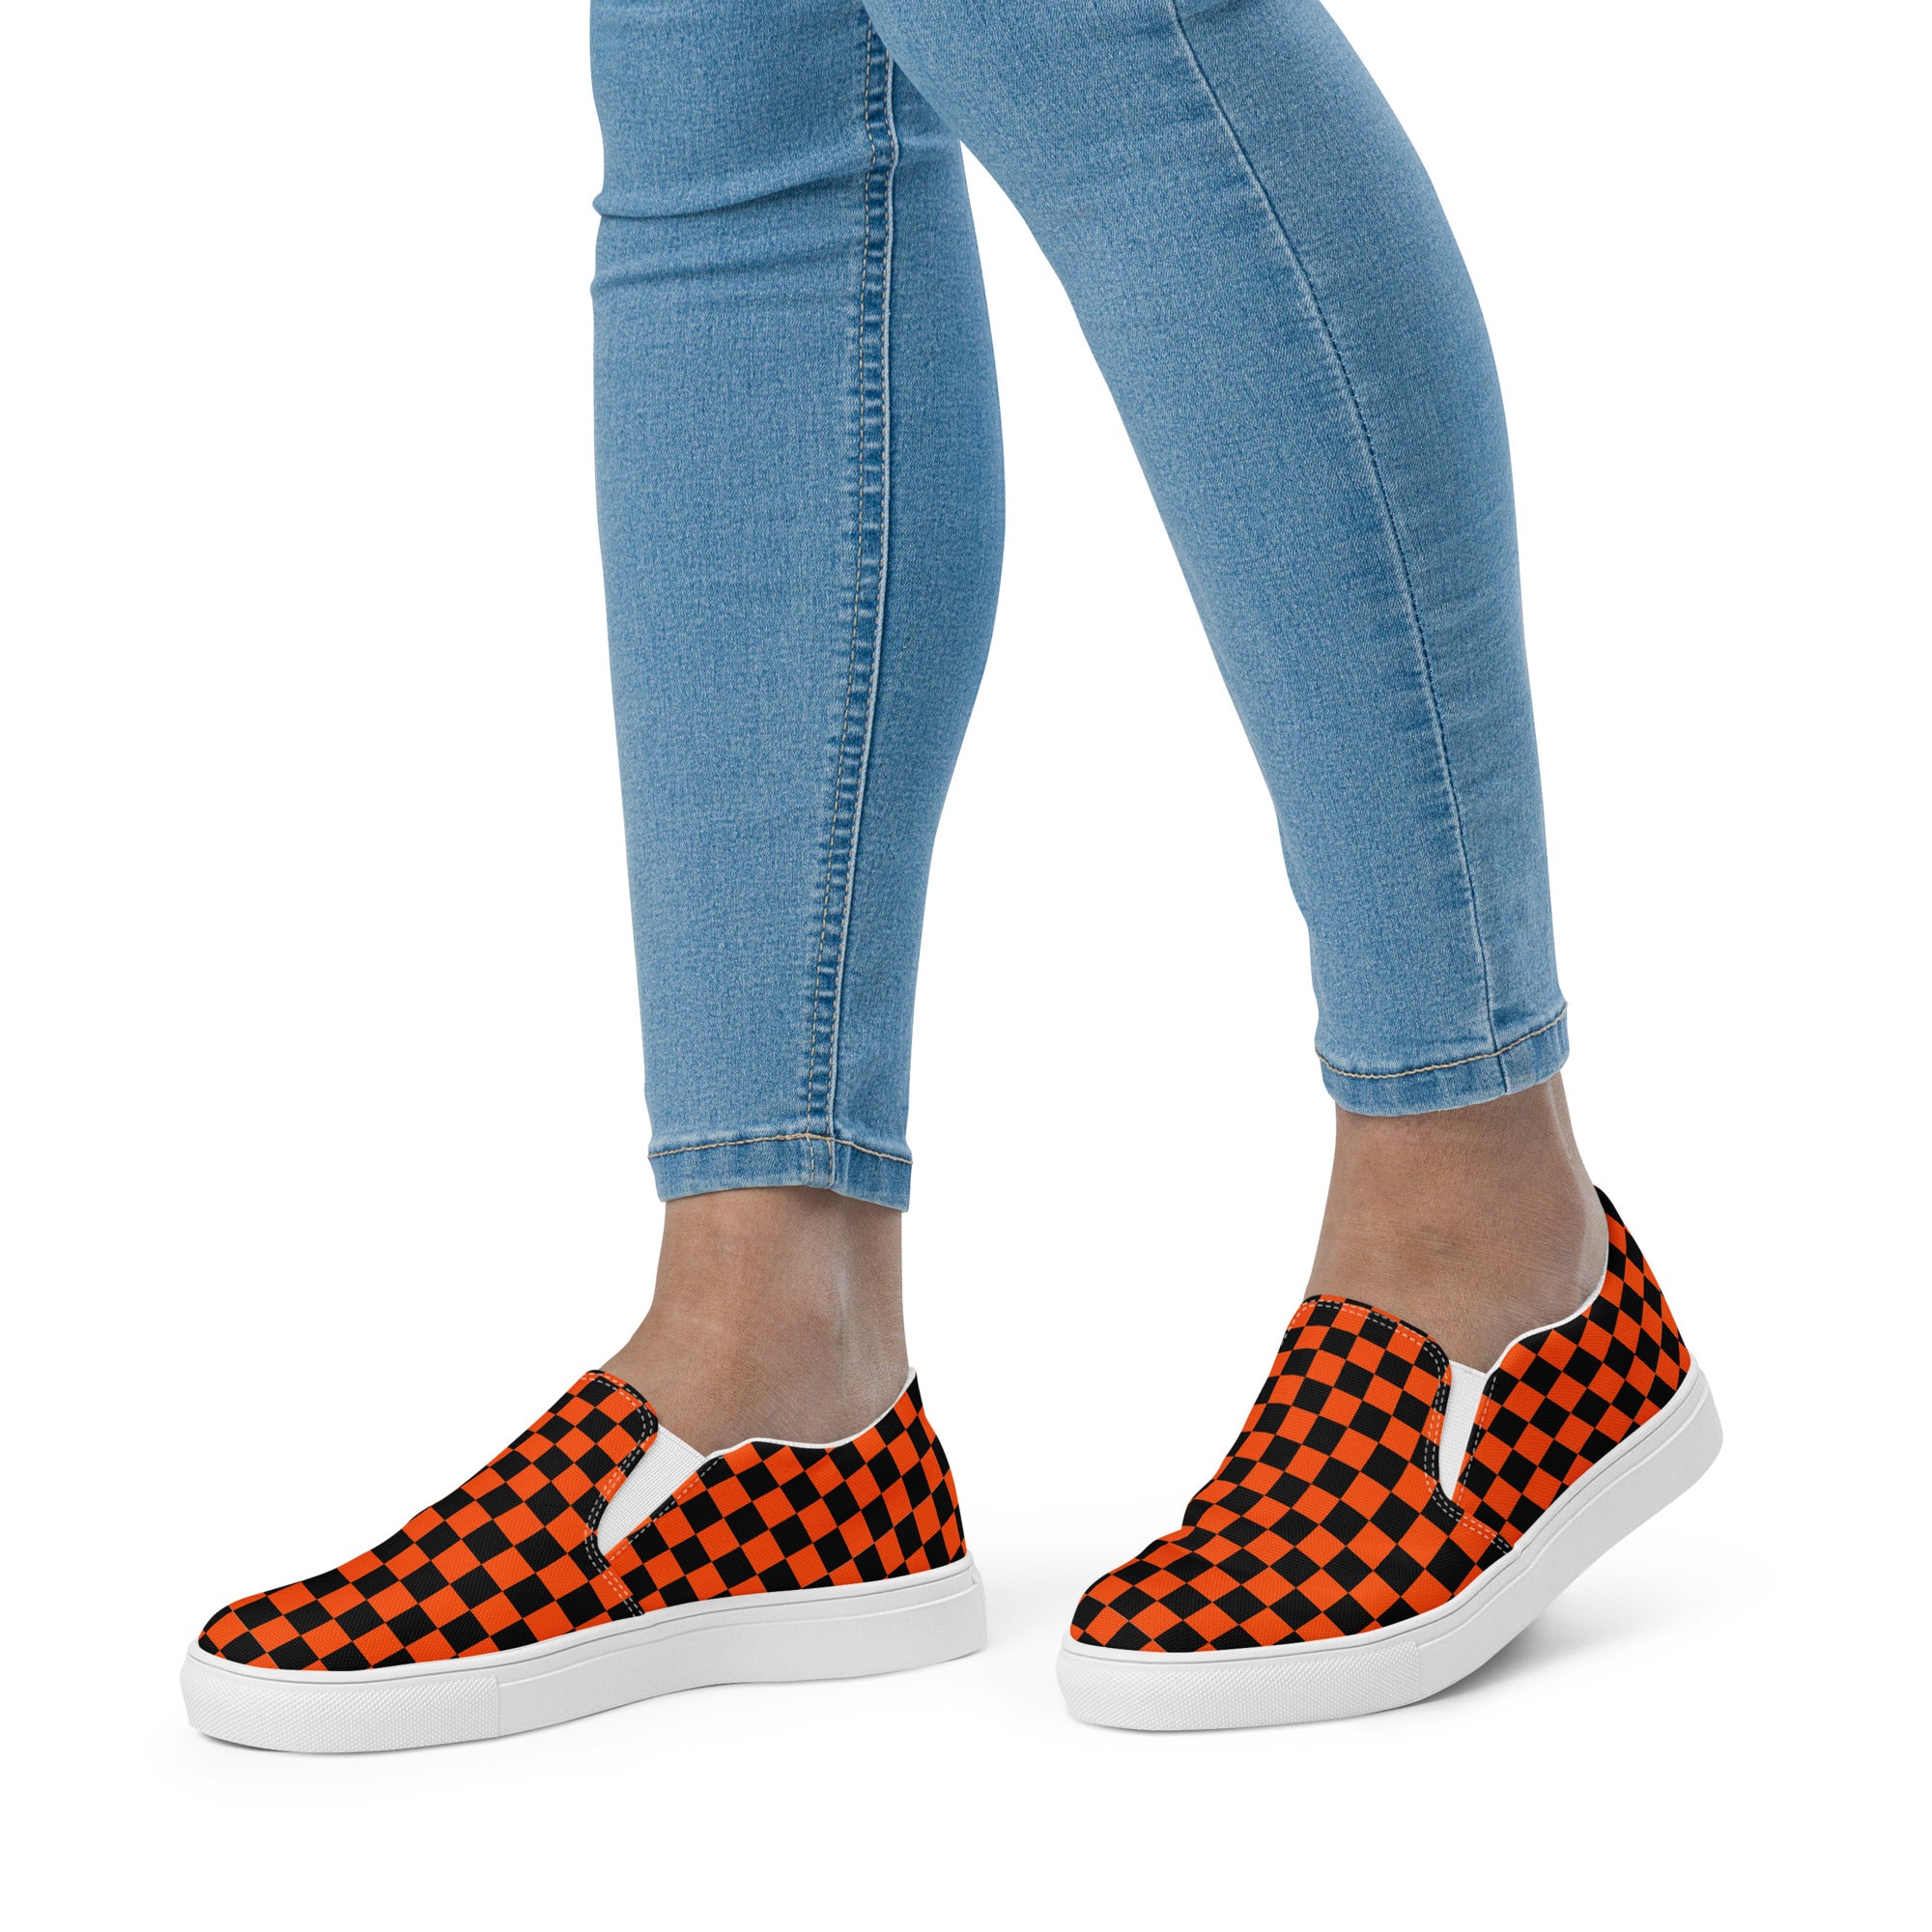 "The Bullies" Women’s Slip-on Canvas Shoes